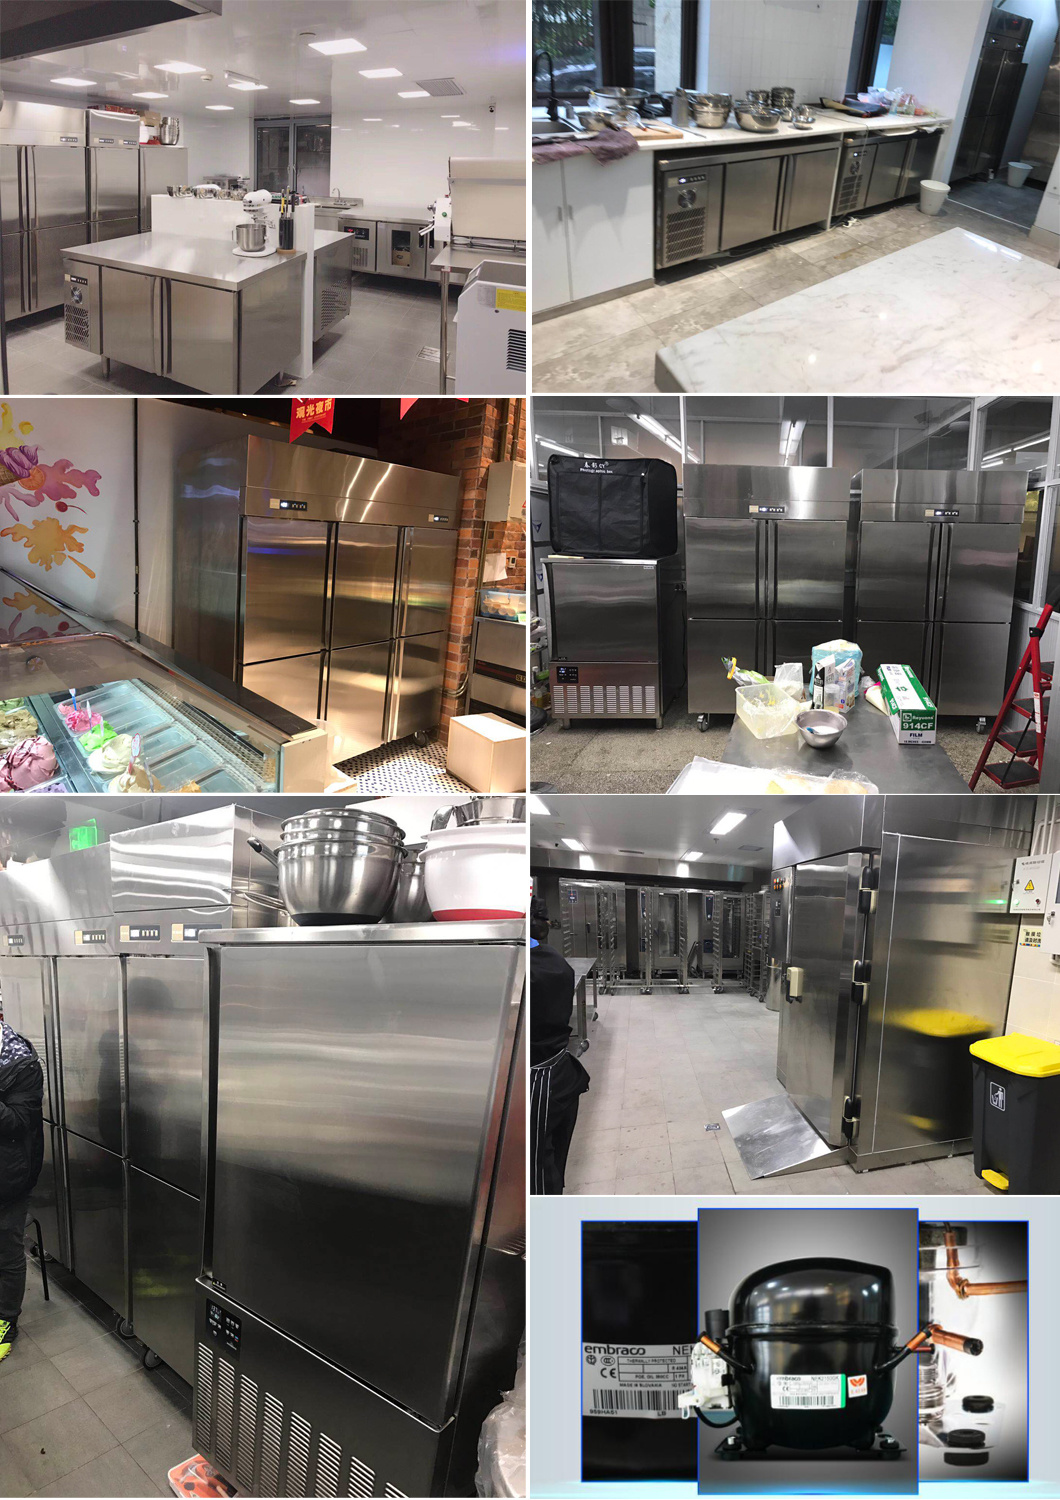 Commercial Stainless Steel Under Counter Refrigerator Counter Top Fridge with Caster